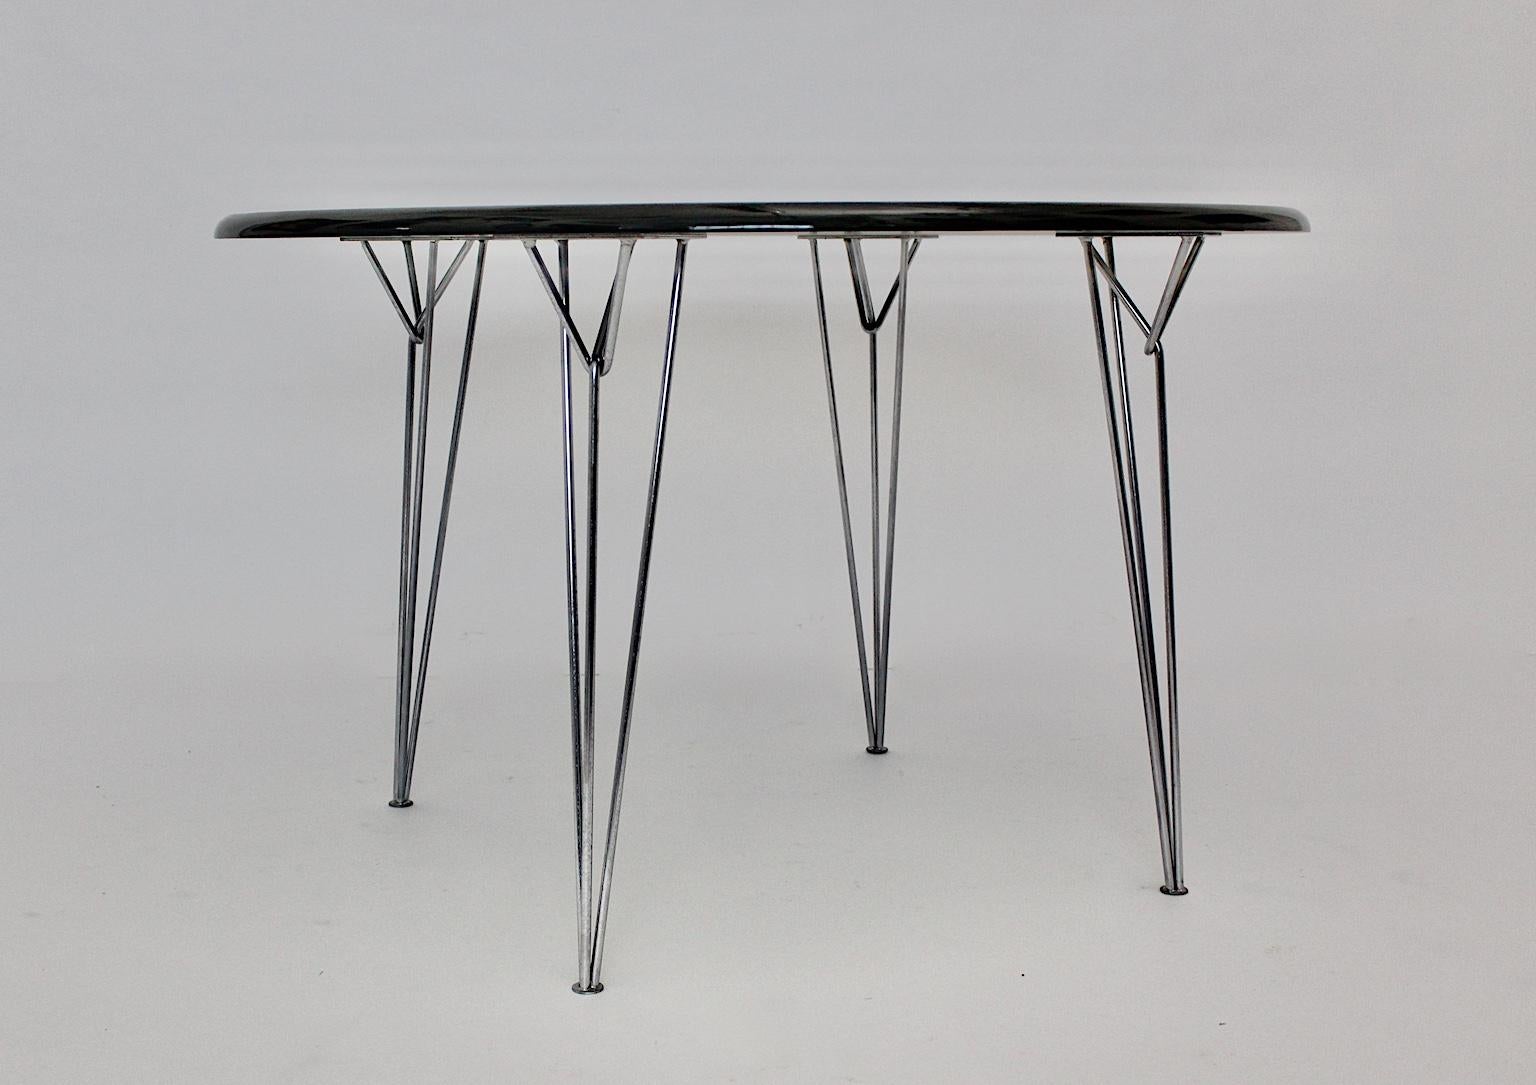 Scandinavian Modern black vintage dining table or center table, which shows
a hair pin metal base and a newly lacquered glossy fiberglass top.
The dining table stands out through its clean and minimalistic design features.
The vintage condition is